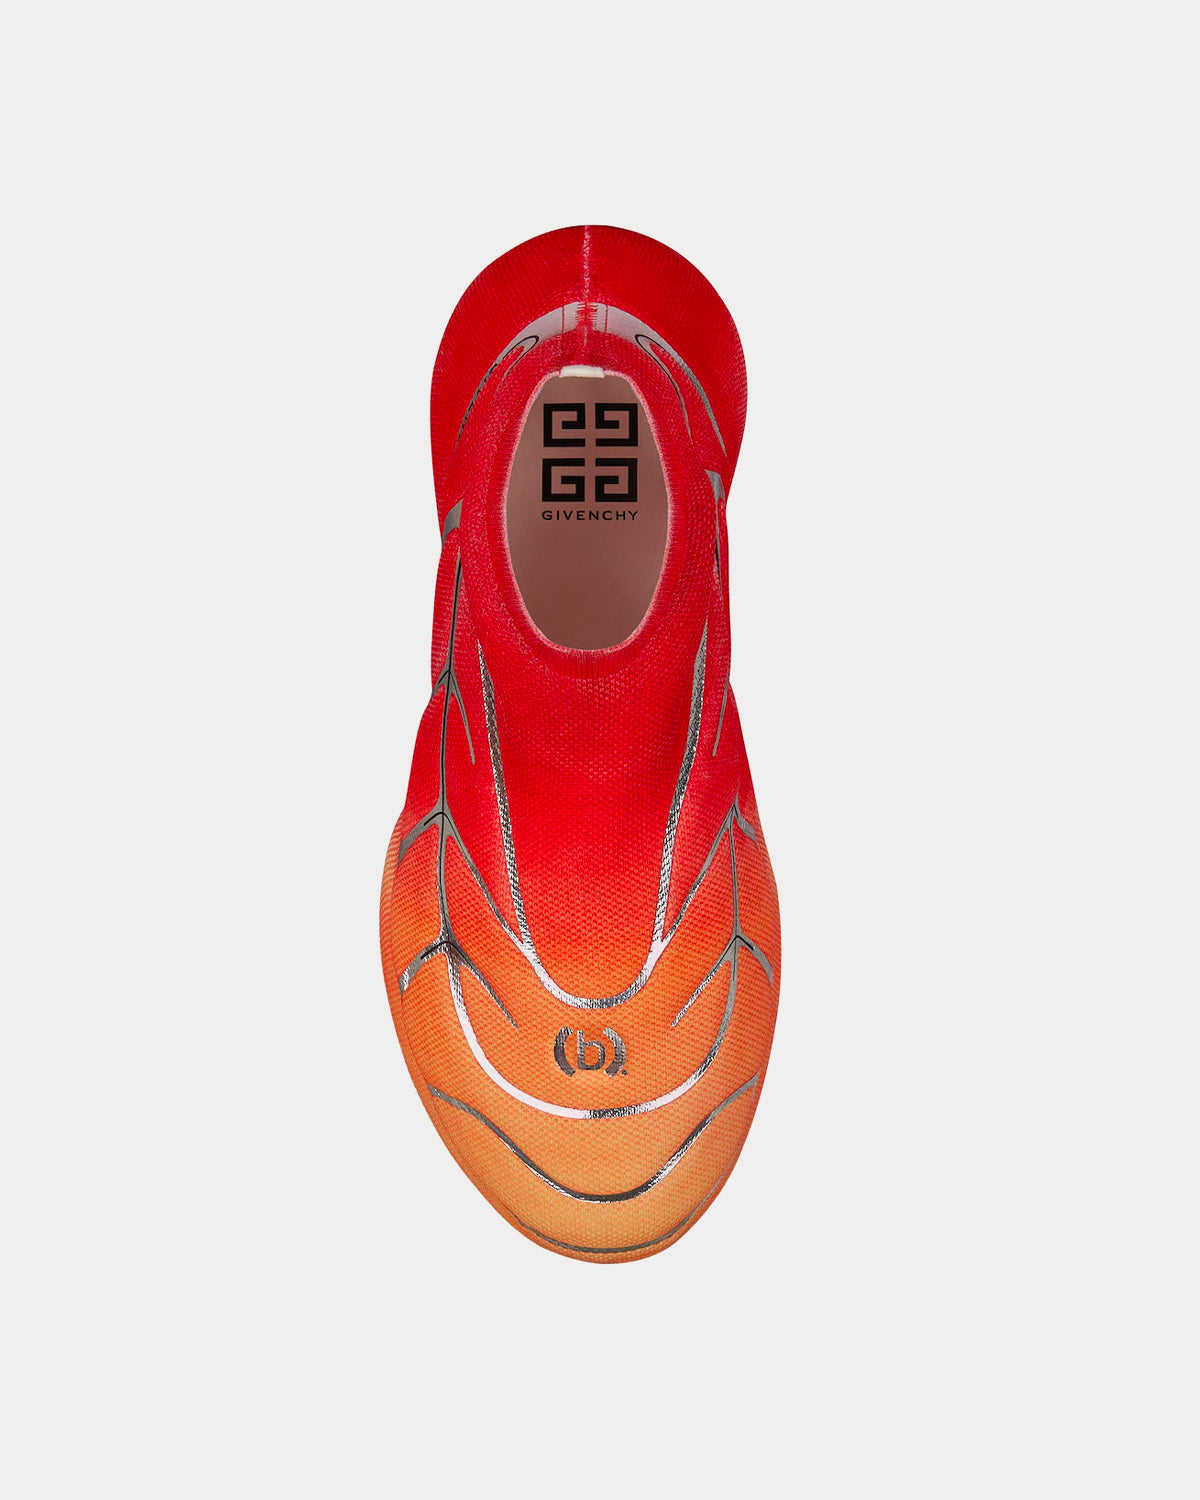 Givenchy x BSTROY - TK-360+ Mid Mesh Red / Yellow Slip On Sneakers